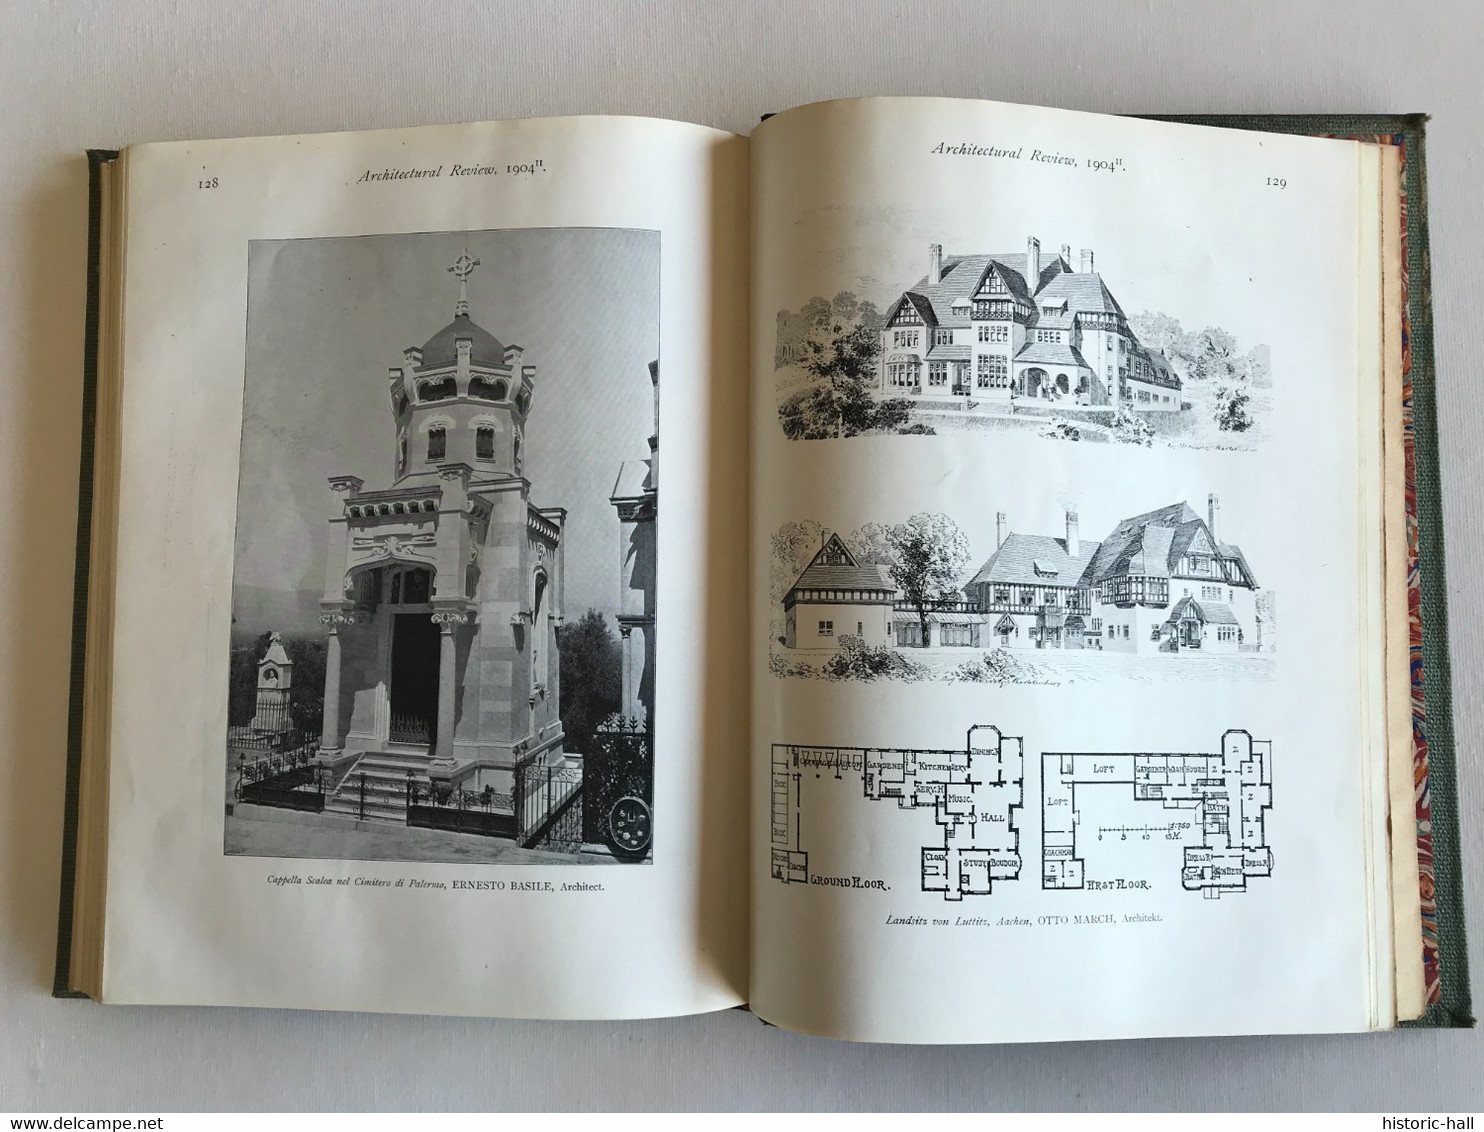 ACADEMY ARCHITECTURE & Architectural Review - vol 25 & 26 - 1904 - Alexander KOCH